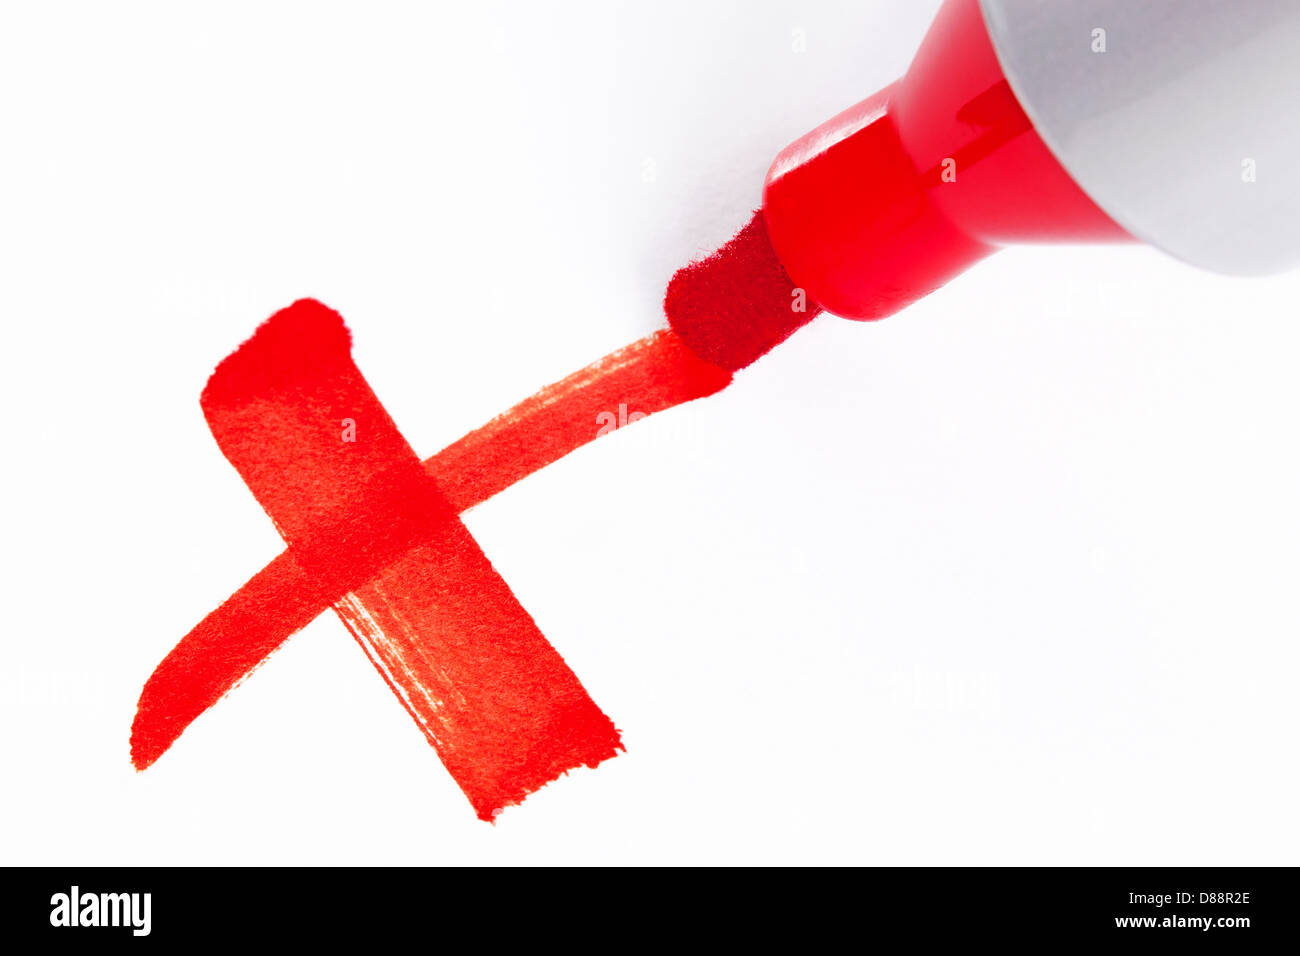 Close-up photo of a big red felt tip marker pen writing a cross X on white paper Stock Photo